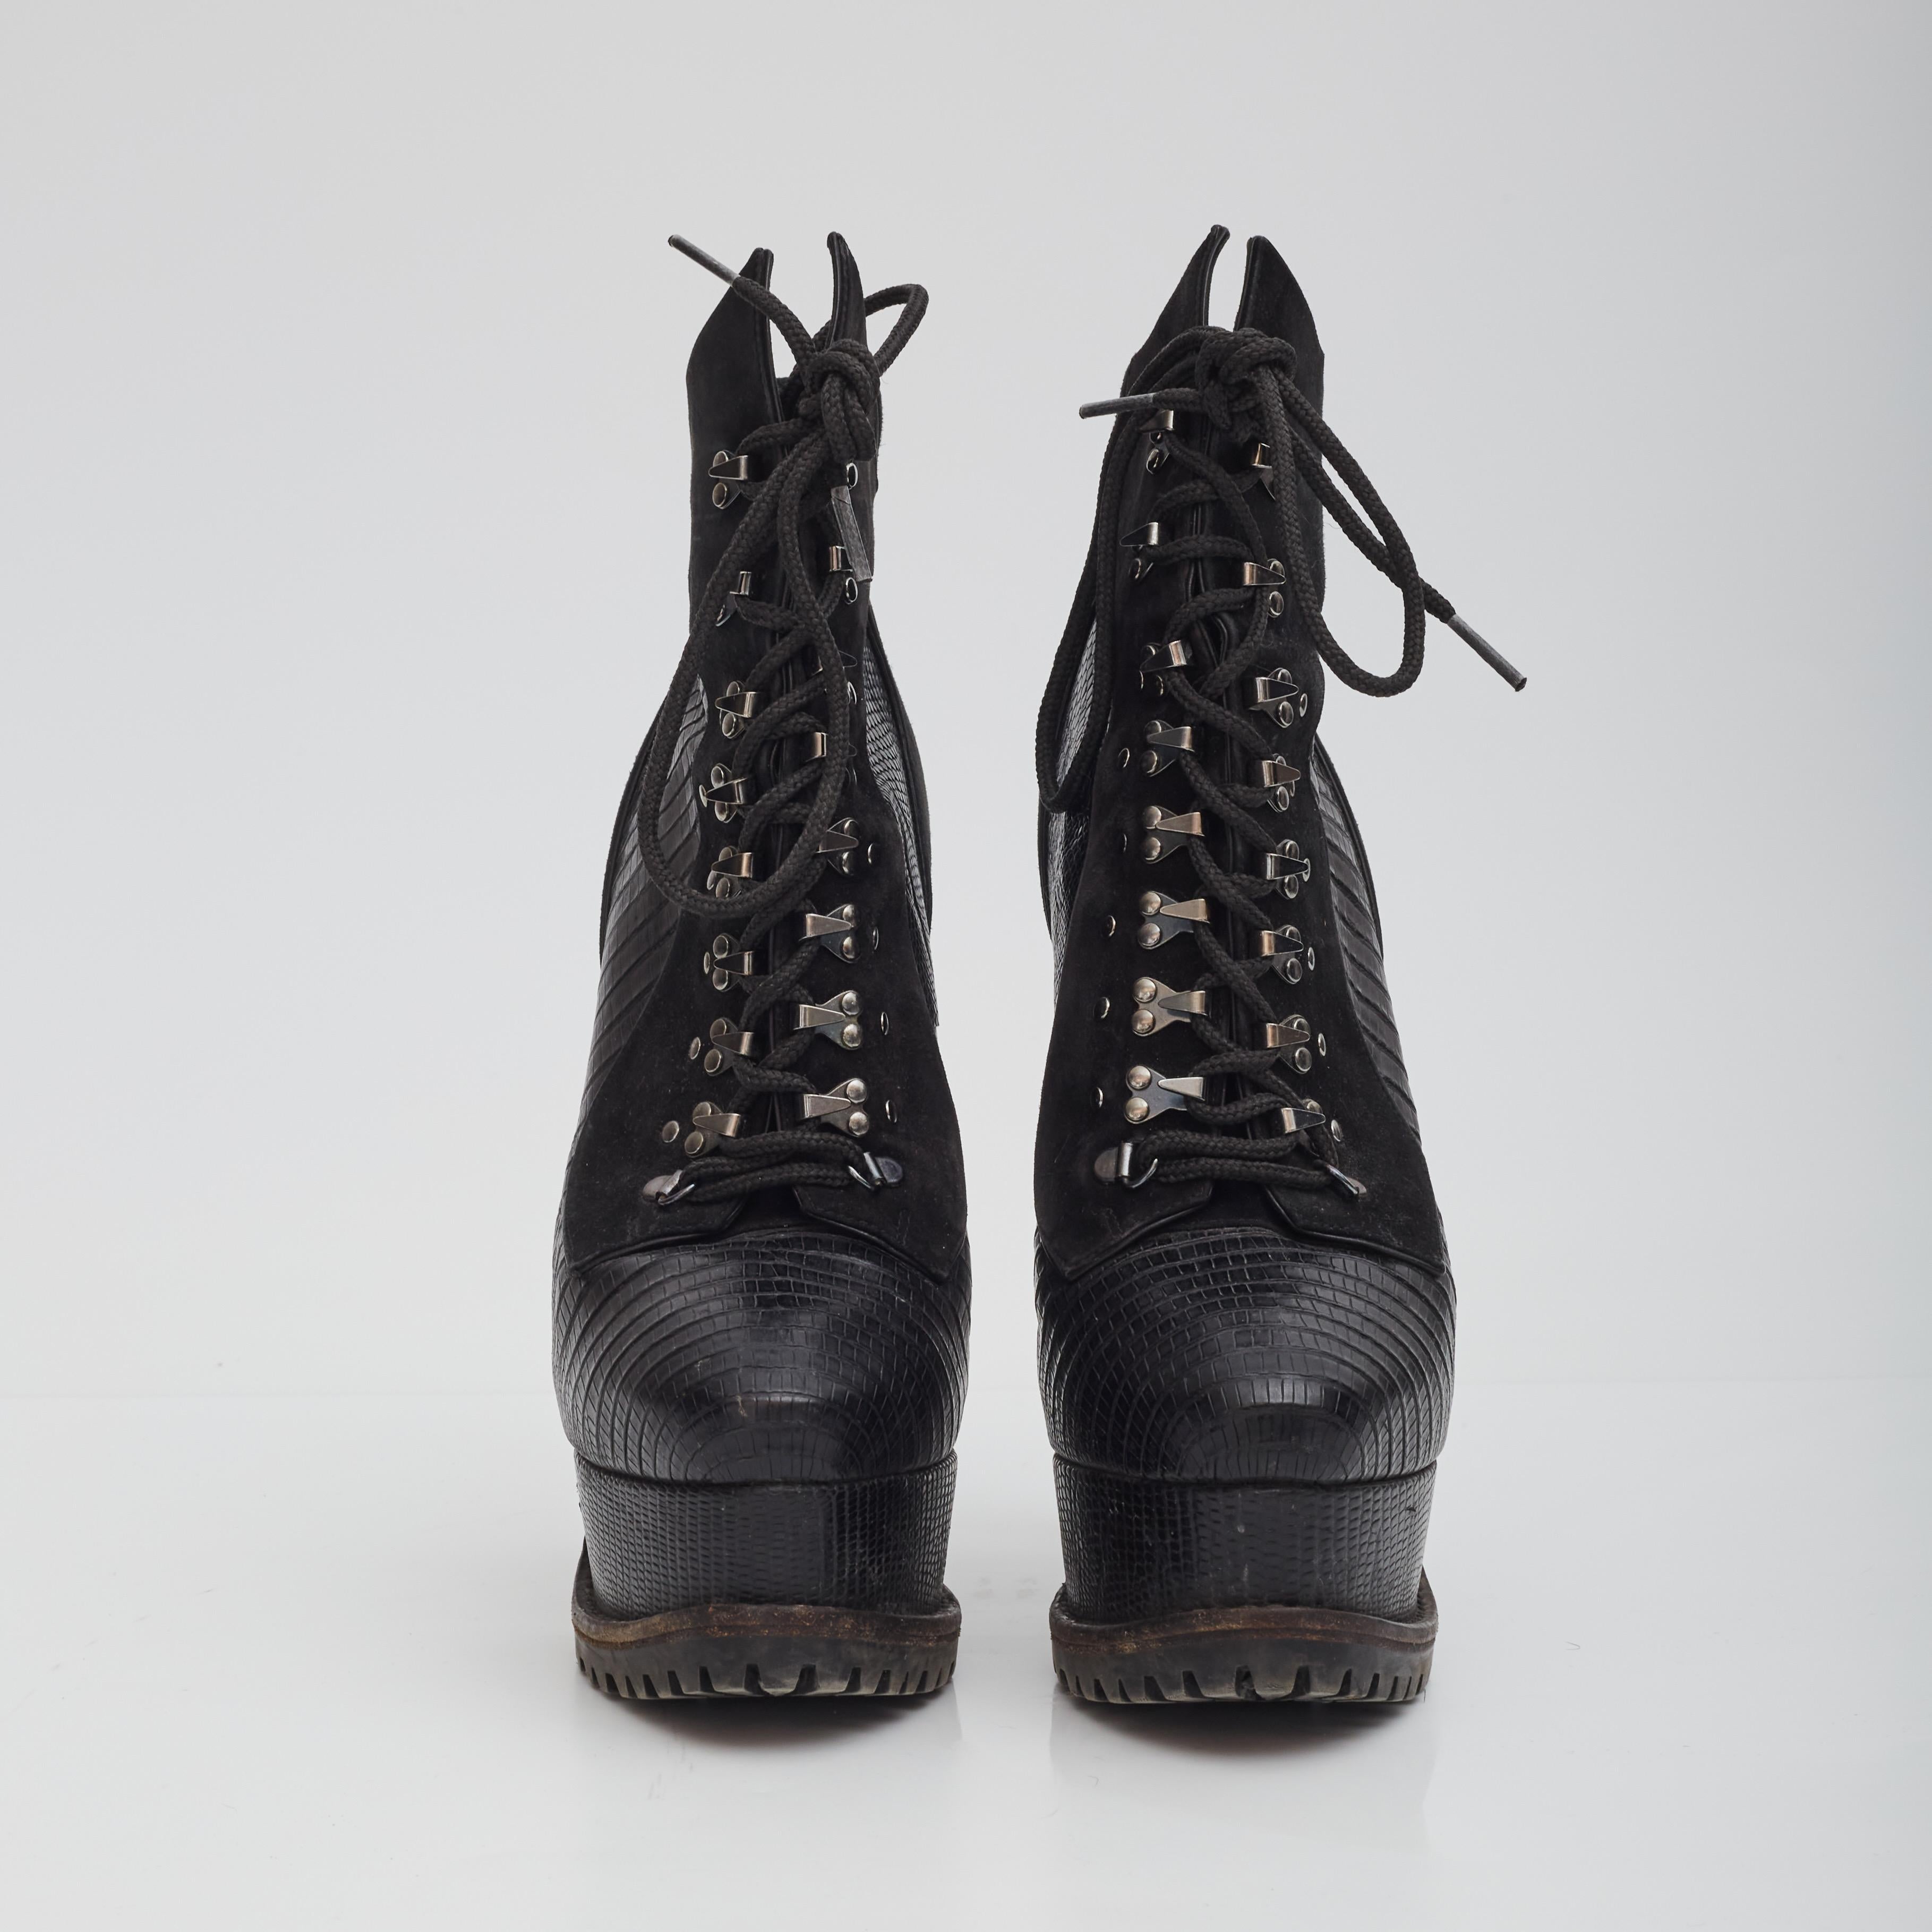 Color: Black
Material: Leather and suede 
Size: 39 EU / 8 US
Heel Height: 165 mm / 6.5”
Platform Height: 50 mm / 1.2” 
Condition: Good. Water damage to suede throughout, cut to top fabric, light signs of use and scrapes to the bottoms. Needs to go